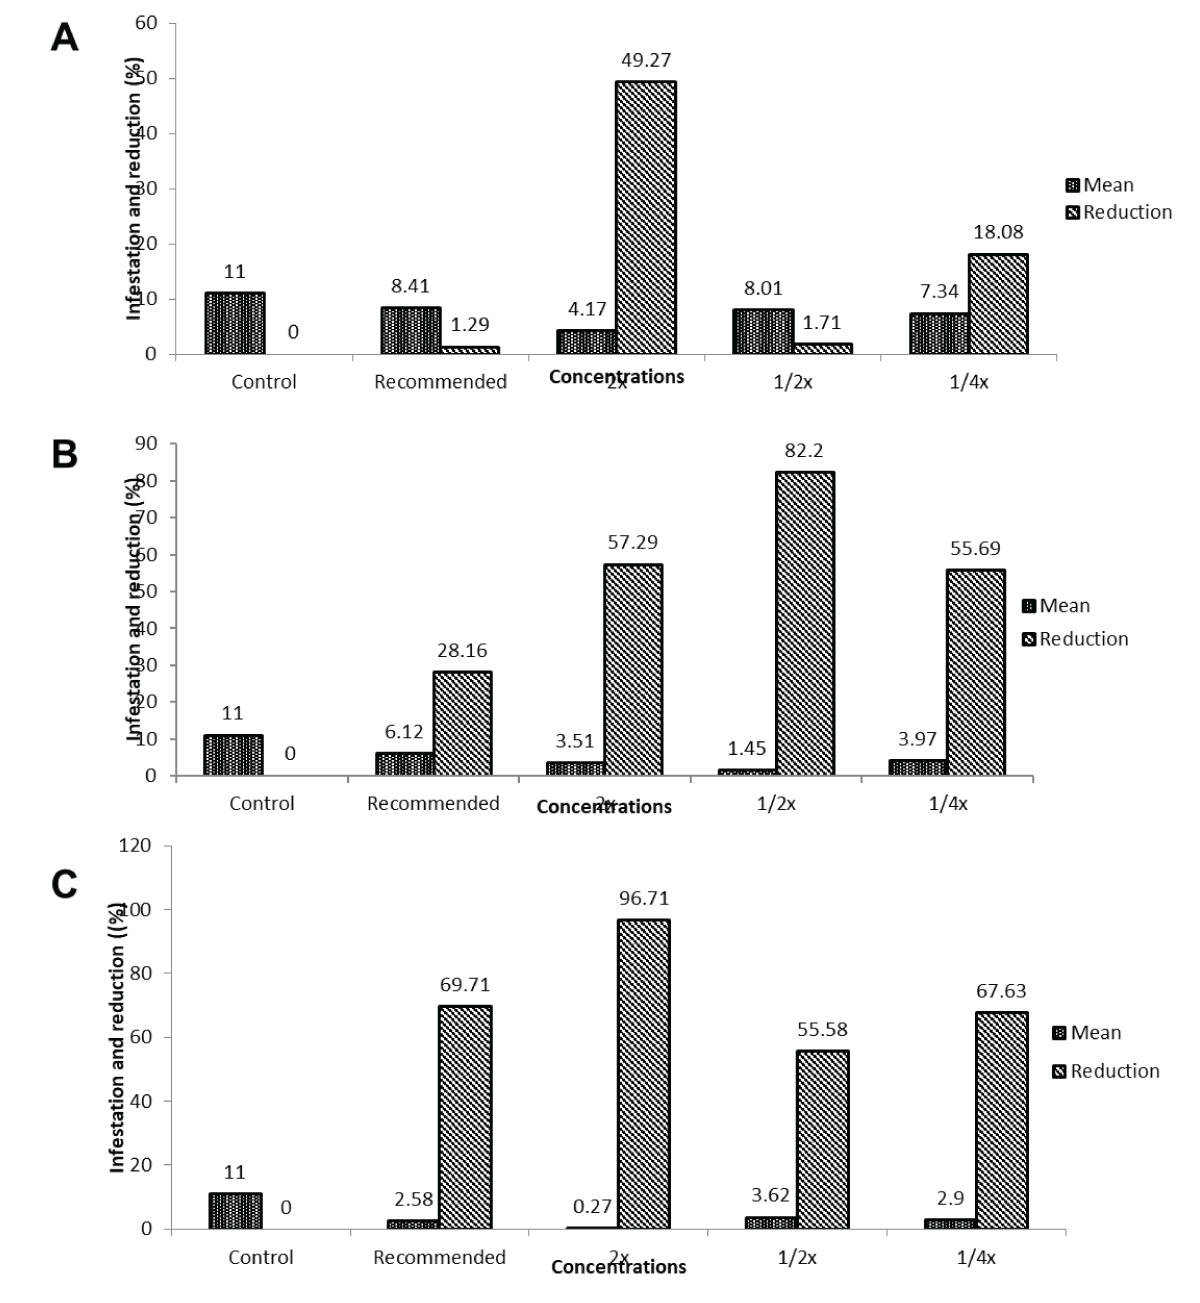 Effect of varying concentrations of field recommended dose (FRD) on maize stem borer infestation across post-treatment intervals. (A) Shows infestation percentages and reductions at different Field Recommended Dose (FRD) concentrations for maize stem borer, with 2x FRD exhibiting the highest reduction of 96.71% at 14 days. (B) Illustrates varied infestation levels and reductions at the 7-day interval, ranging from 28.16% to 82.20% across FRD concentrations. (C) Depicts the infestation trend over different post-treatment intervals, emphasizing 2x FRD’s highest reduction (96.71%) at 14 days for maize stem borer.Second application of IGRs.